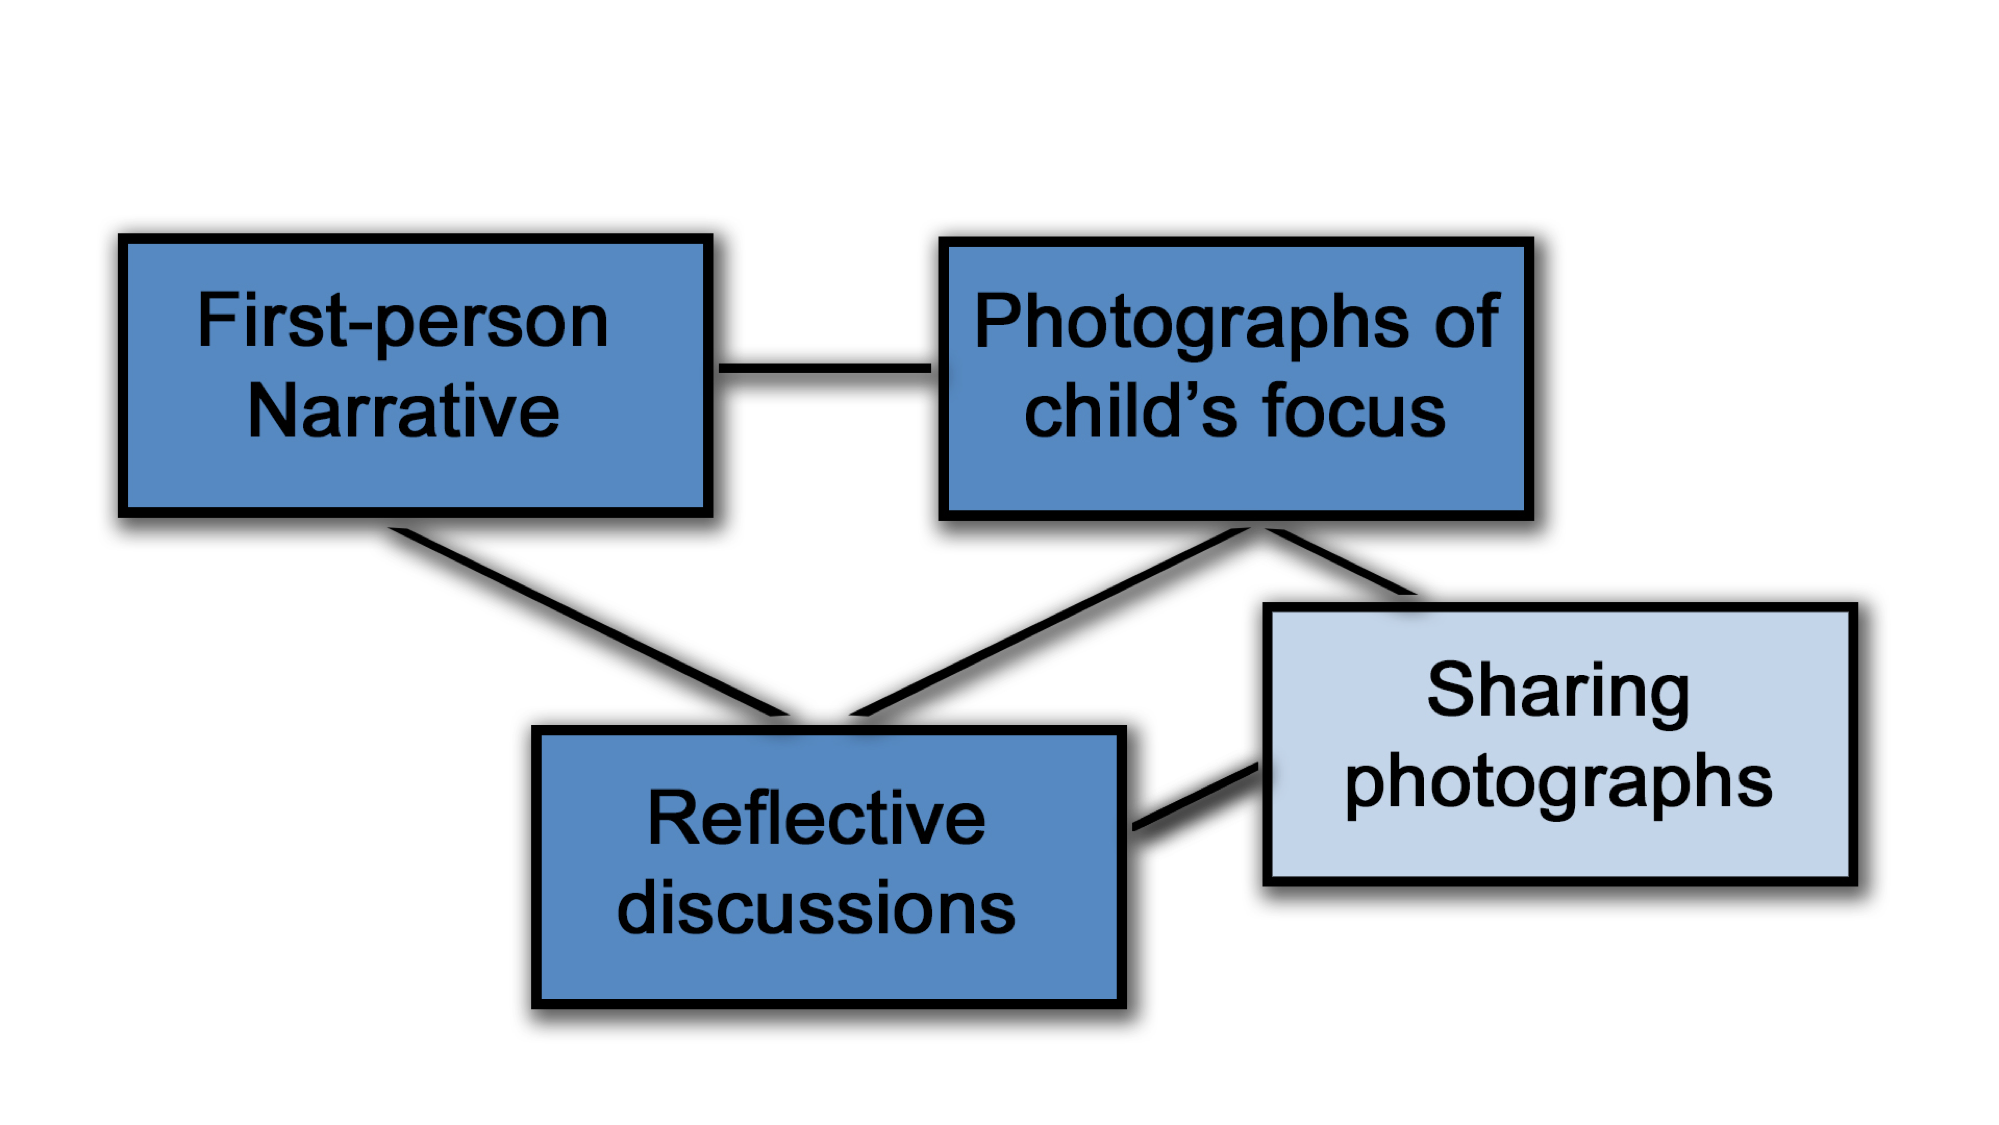 There are four boxes, First person narrative, photographs of child's focus, reflective discussions and sharing photographs. Lines join them to each other. First Person narrative links to reflective discussions and photographs of child's focus, whilst these last two both link to sharing photographs as well. Sharing photographs is highlighted.